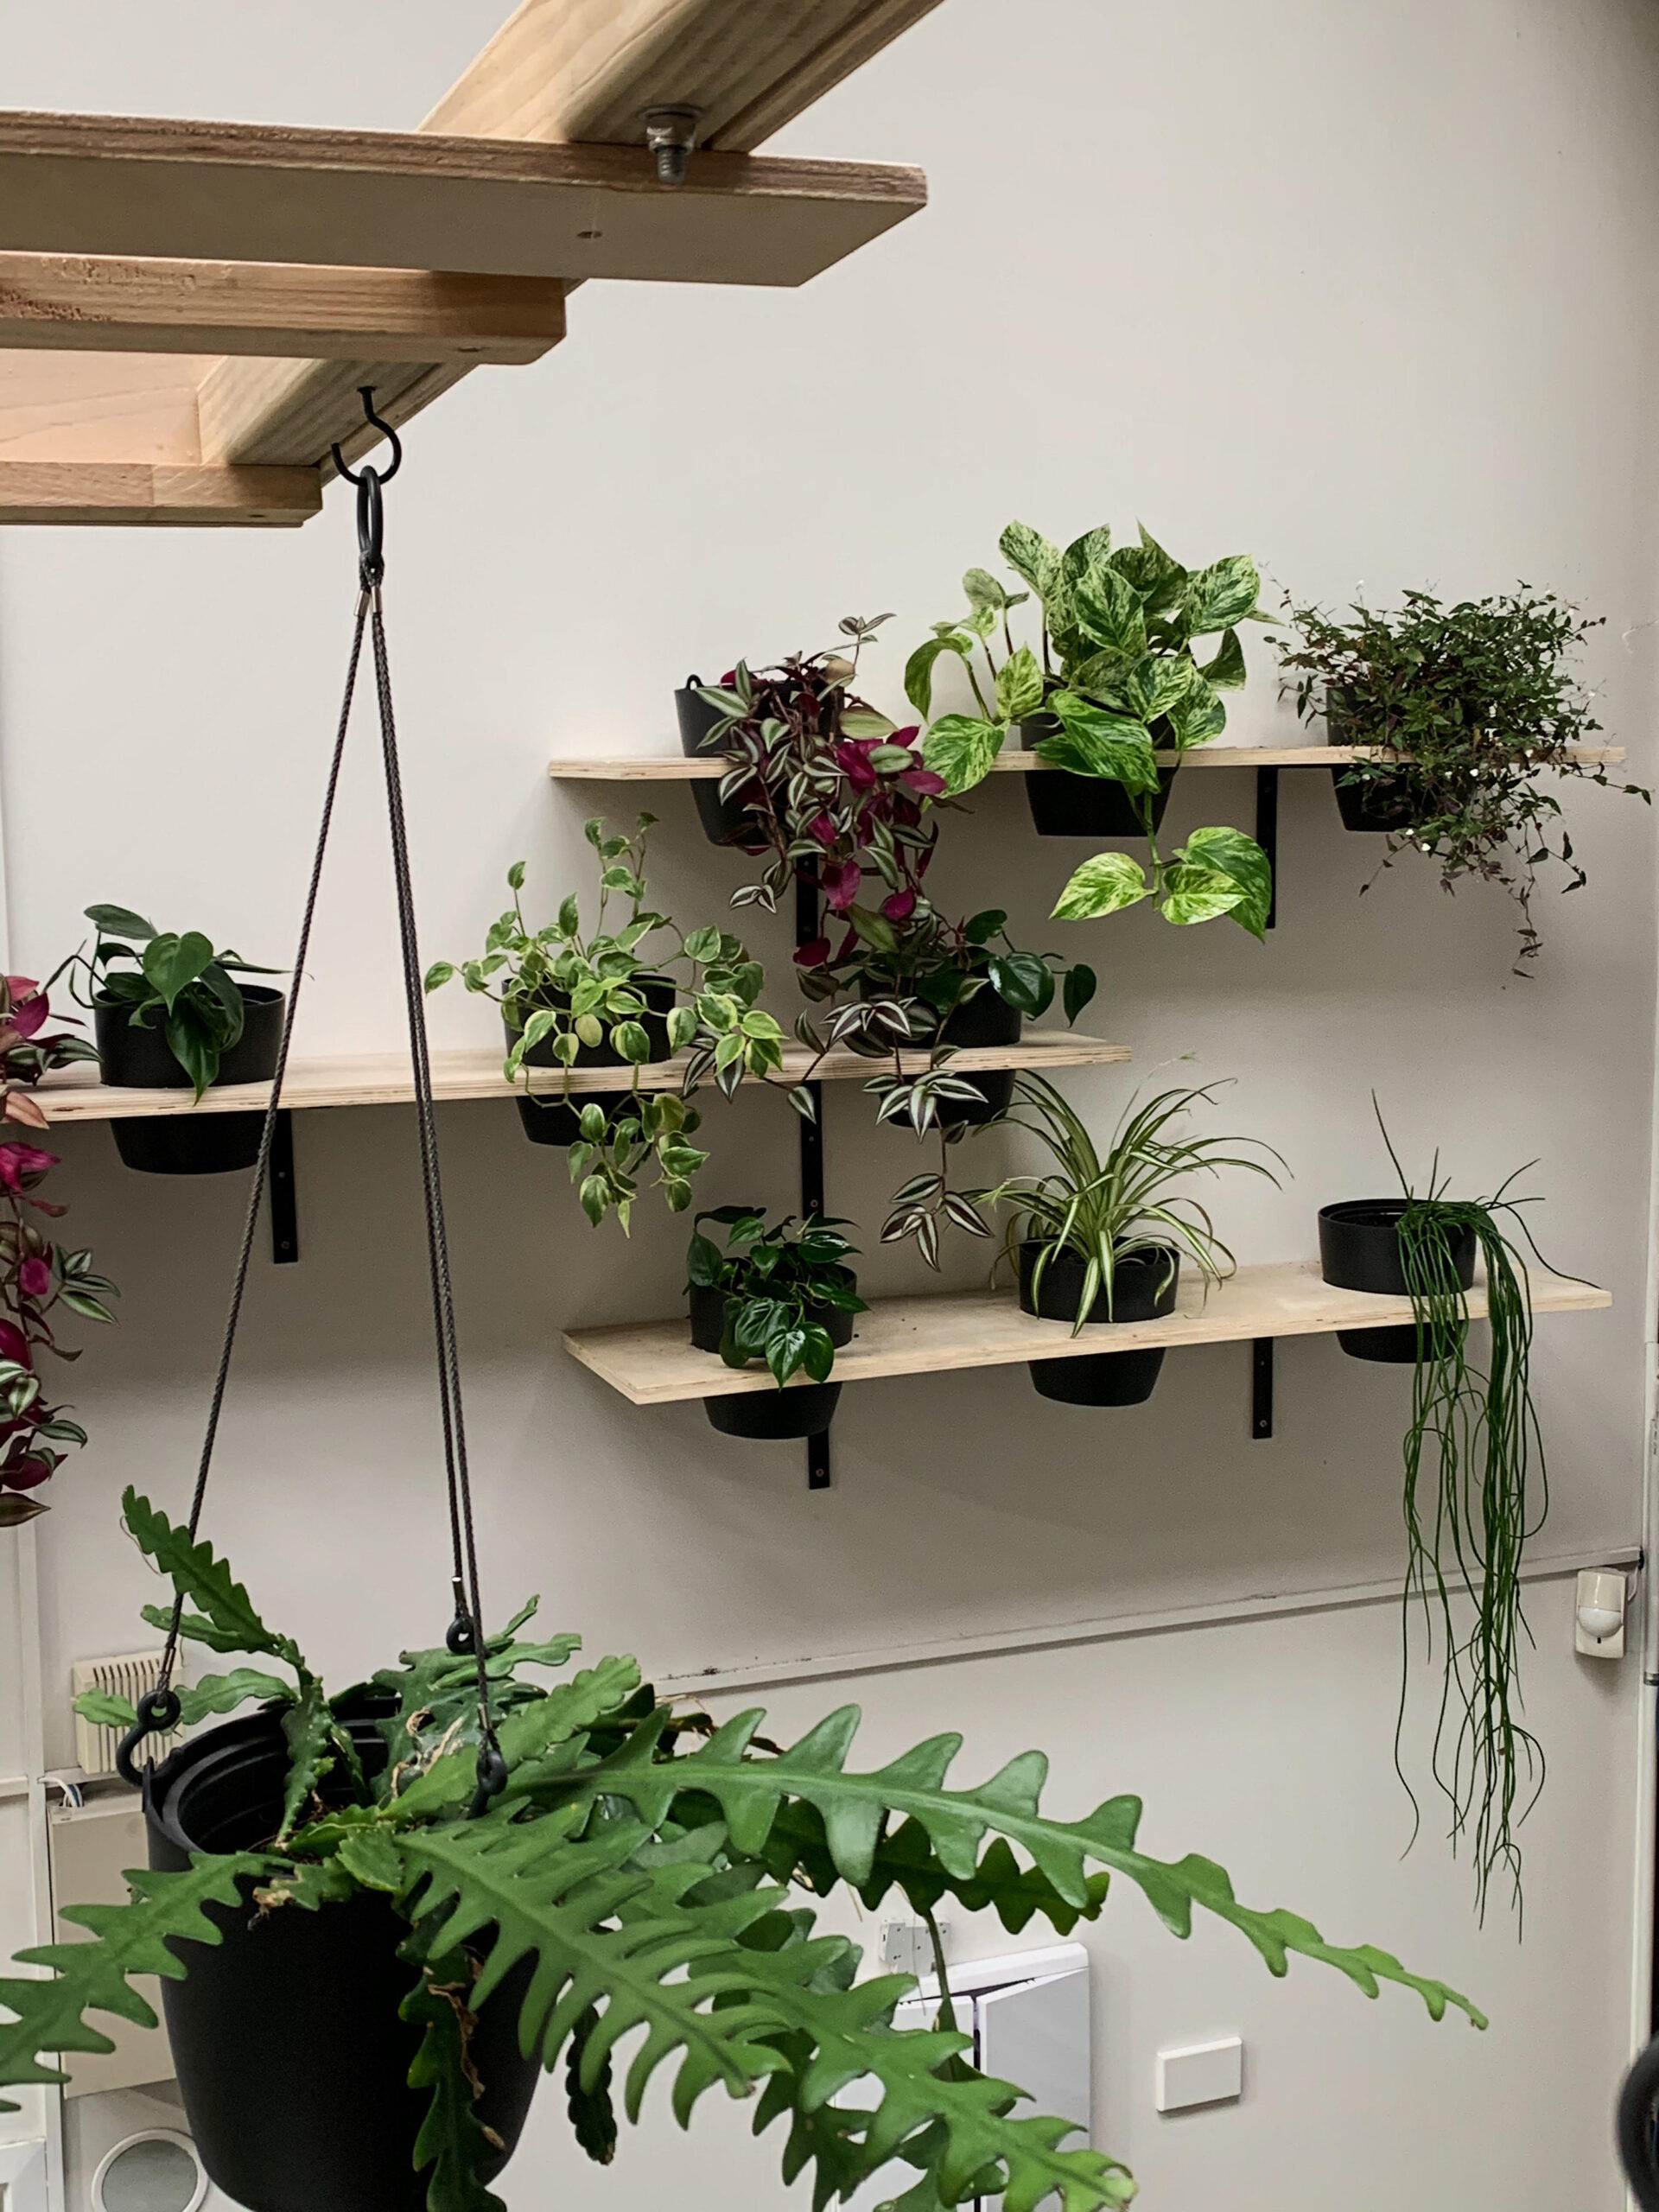 Hanging indoor plants - event hire or long term hire from The Green Room, Tauranga